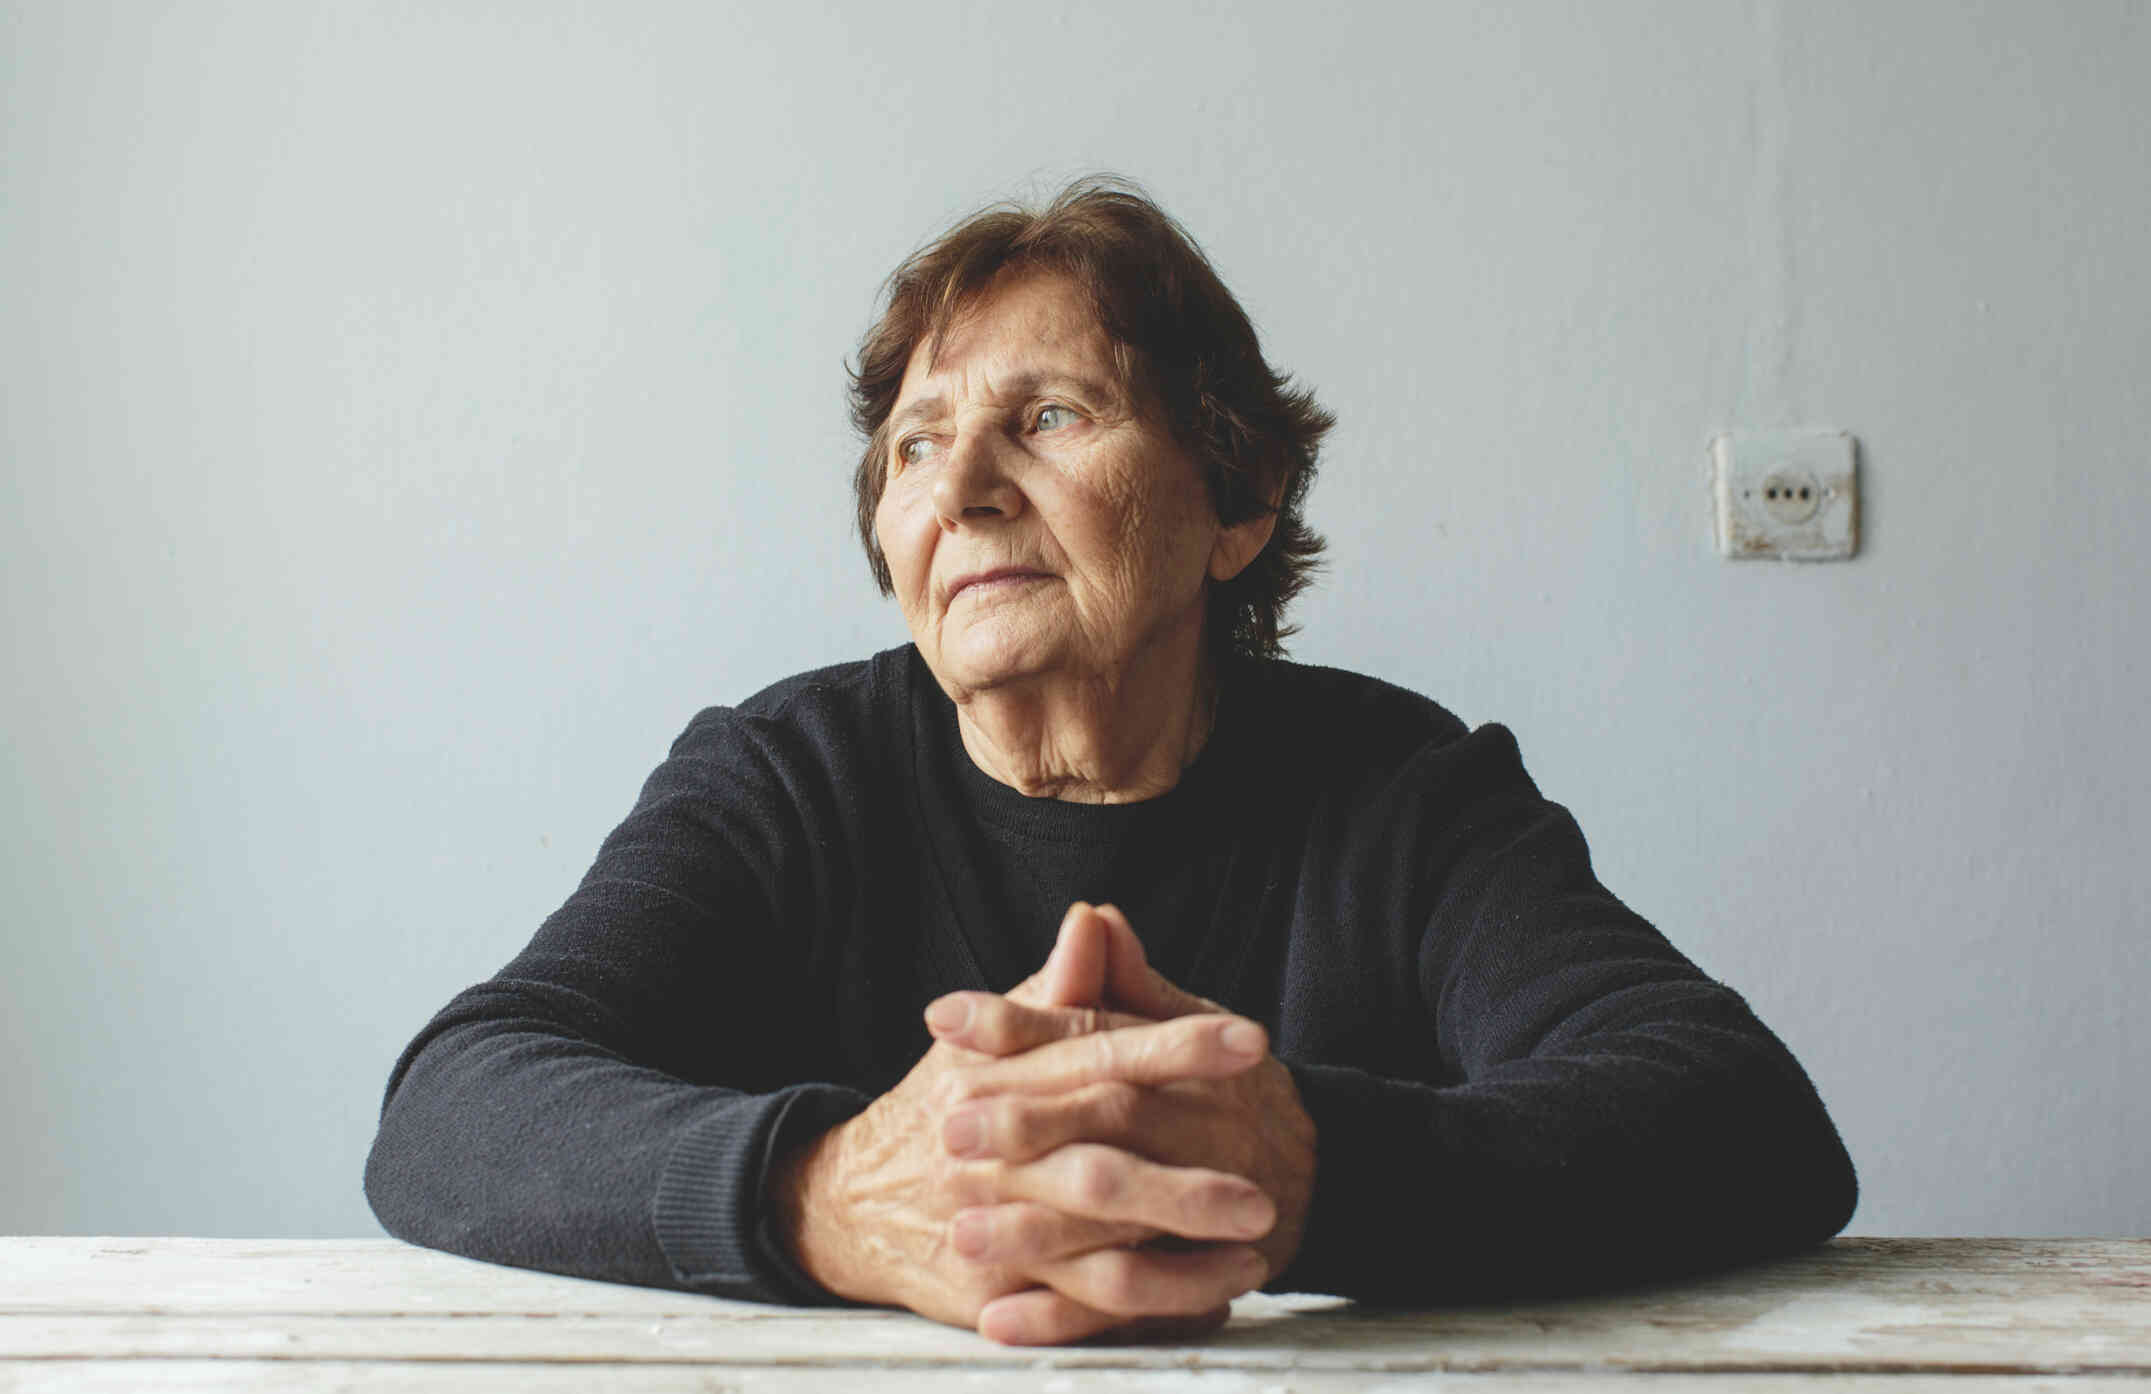 A mature woman in a black shirt sits with her hands folded together as she glances off with a worried expression.